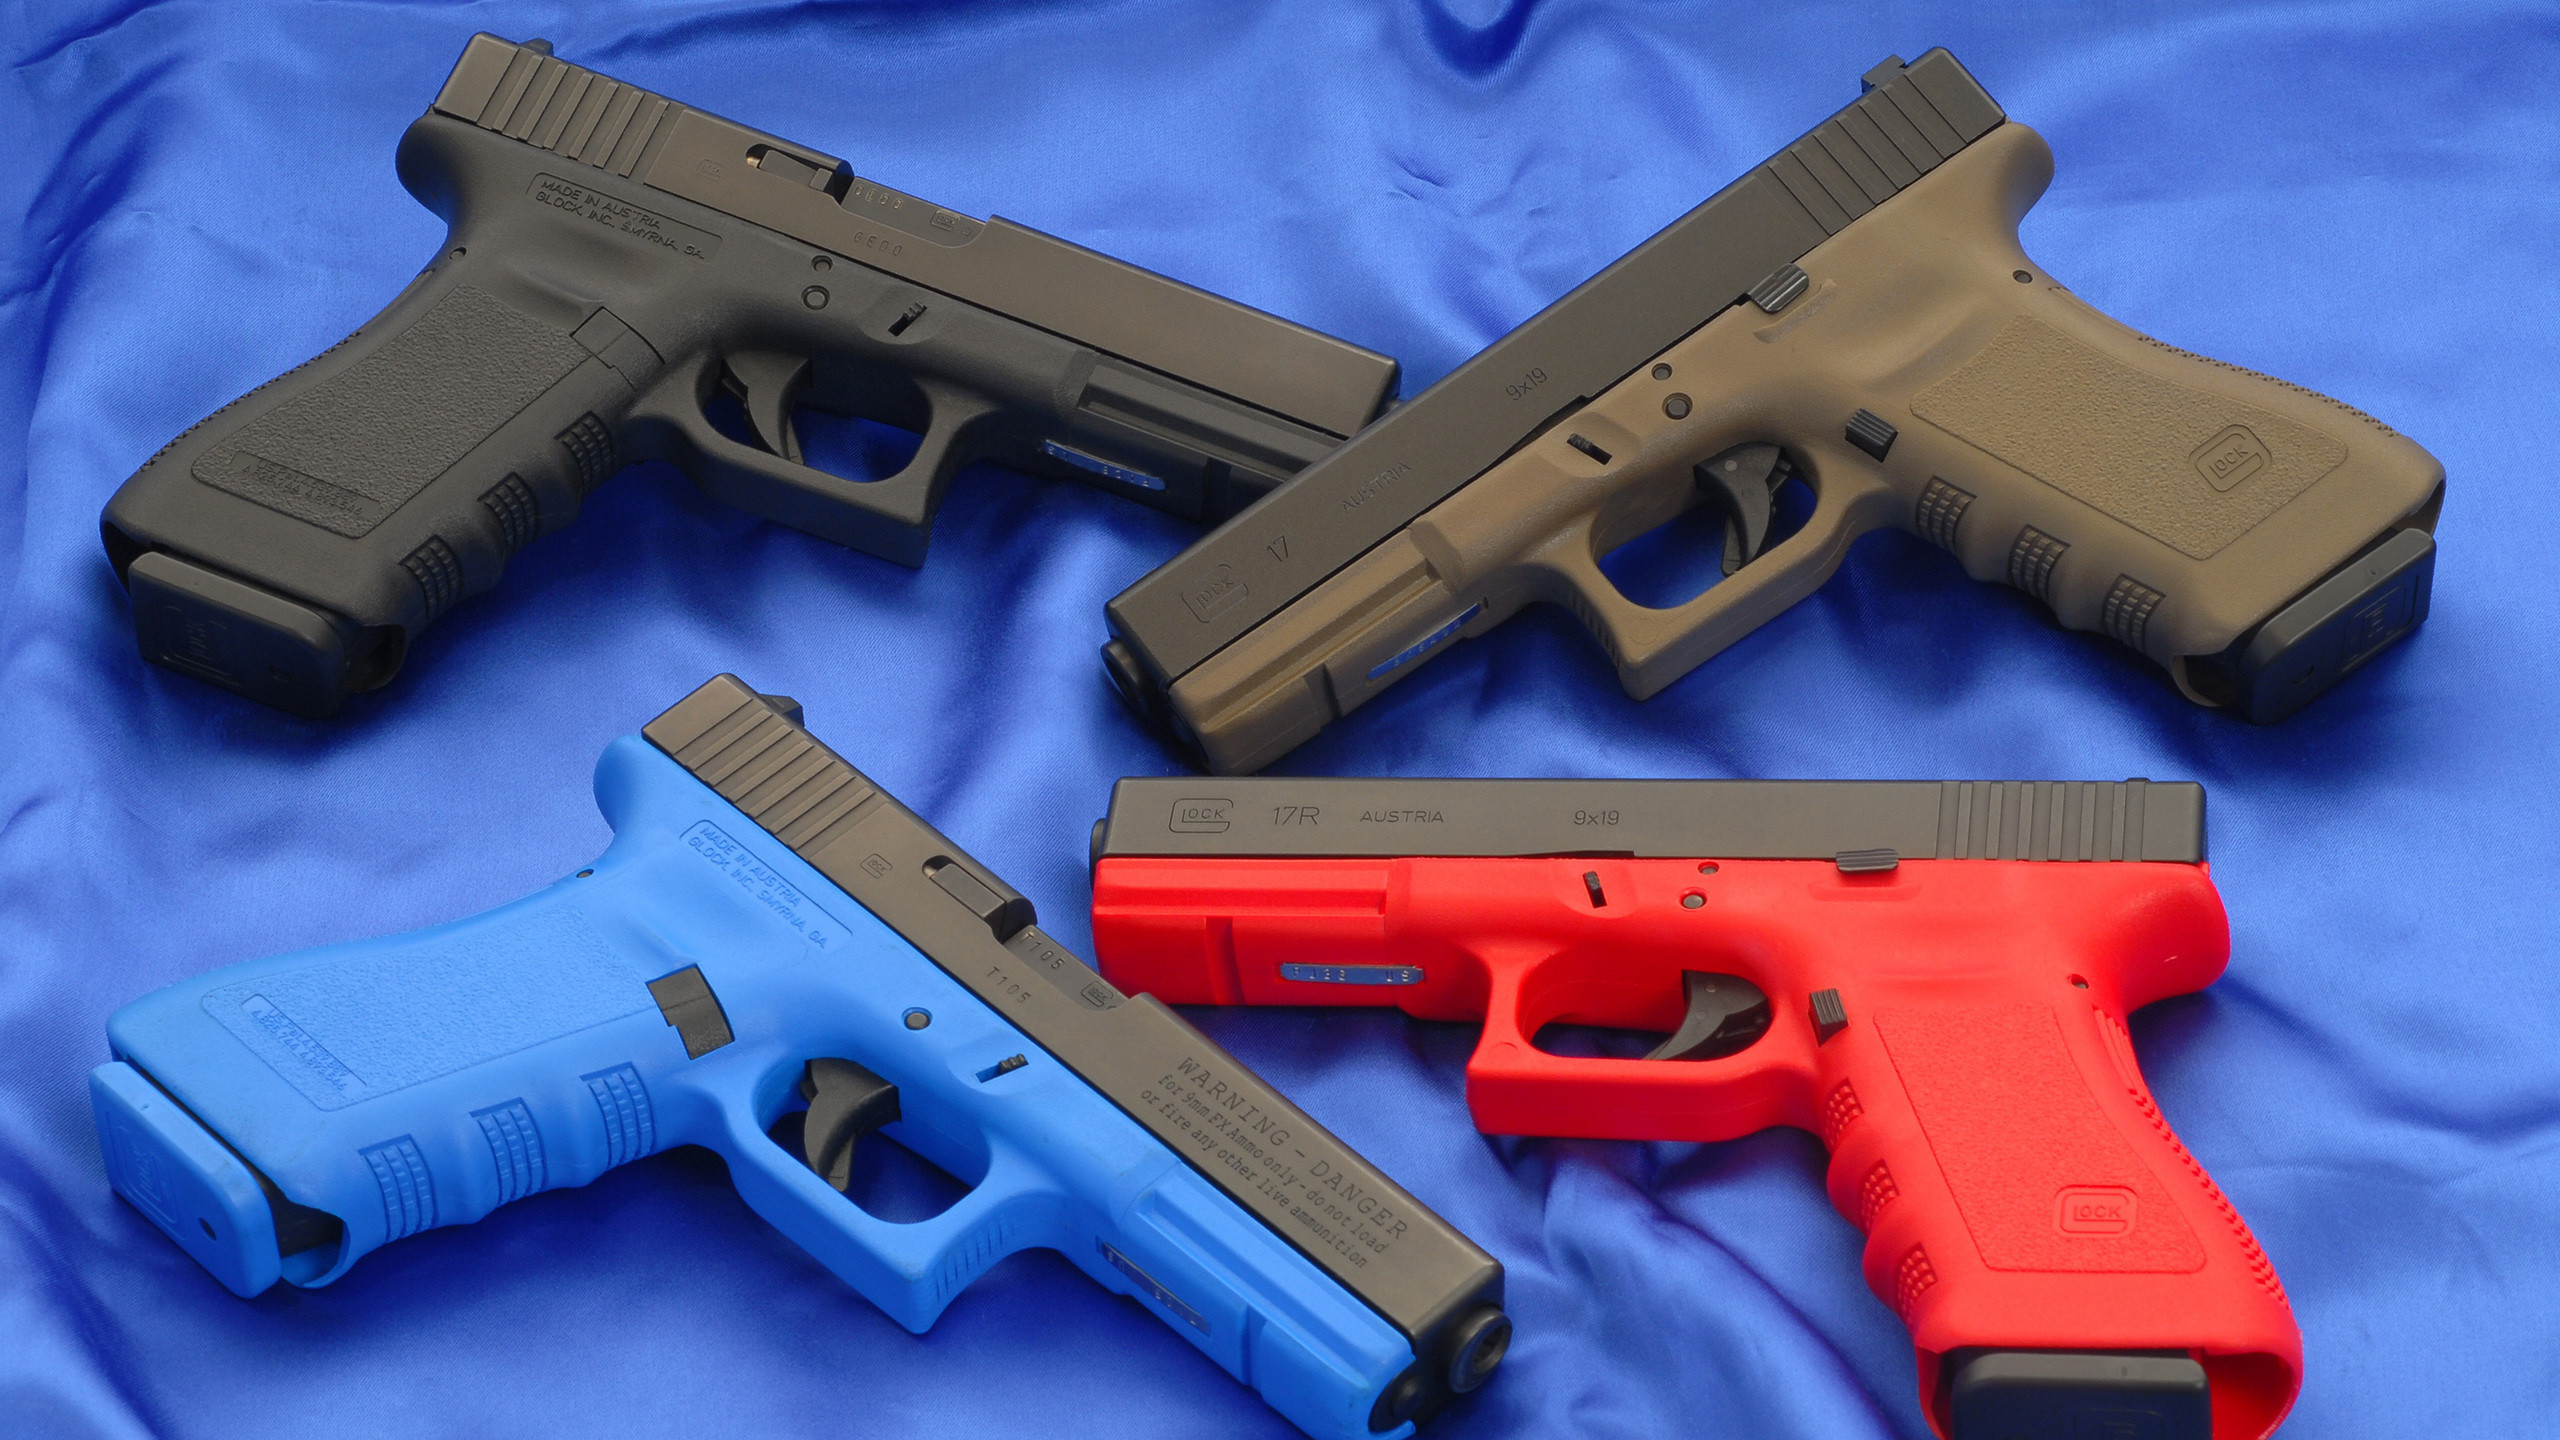 2560x1440 17r, 17t load, wallpapers, glock 17, weapons, 17od, guns,